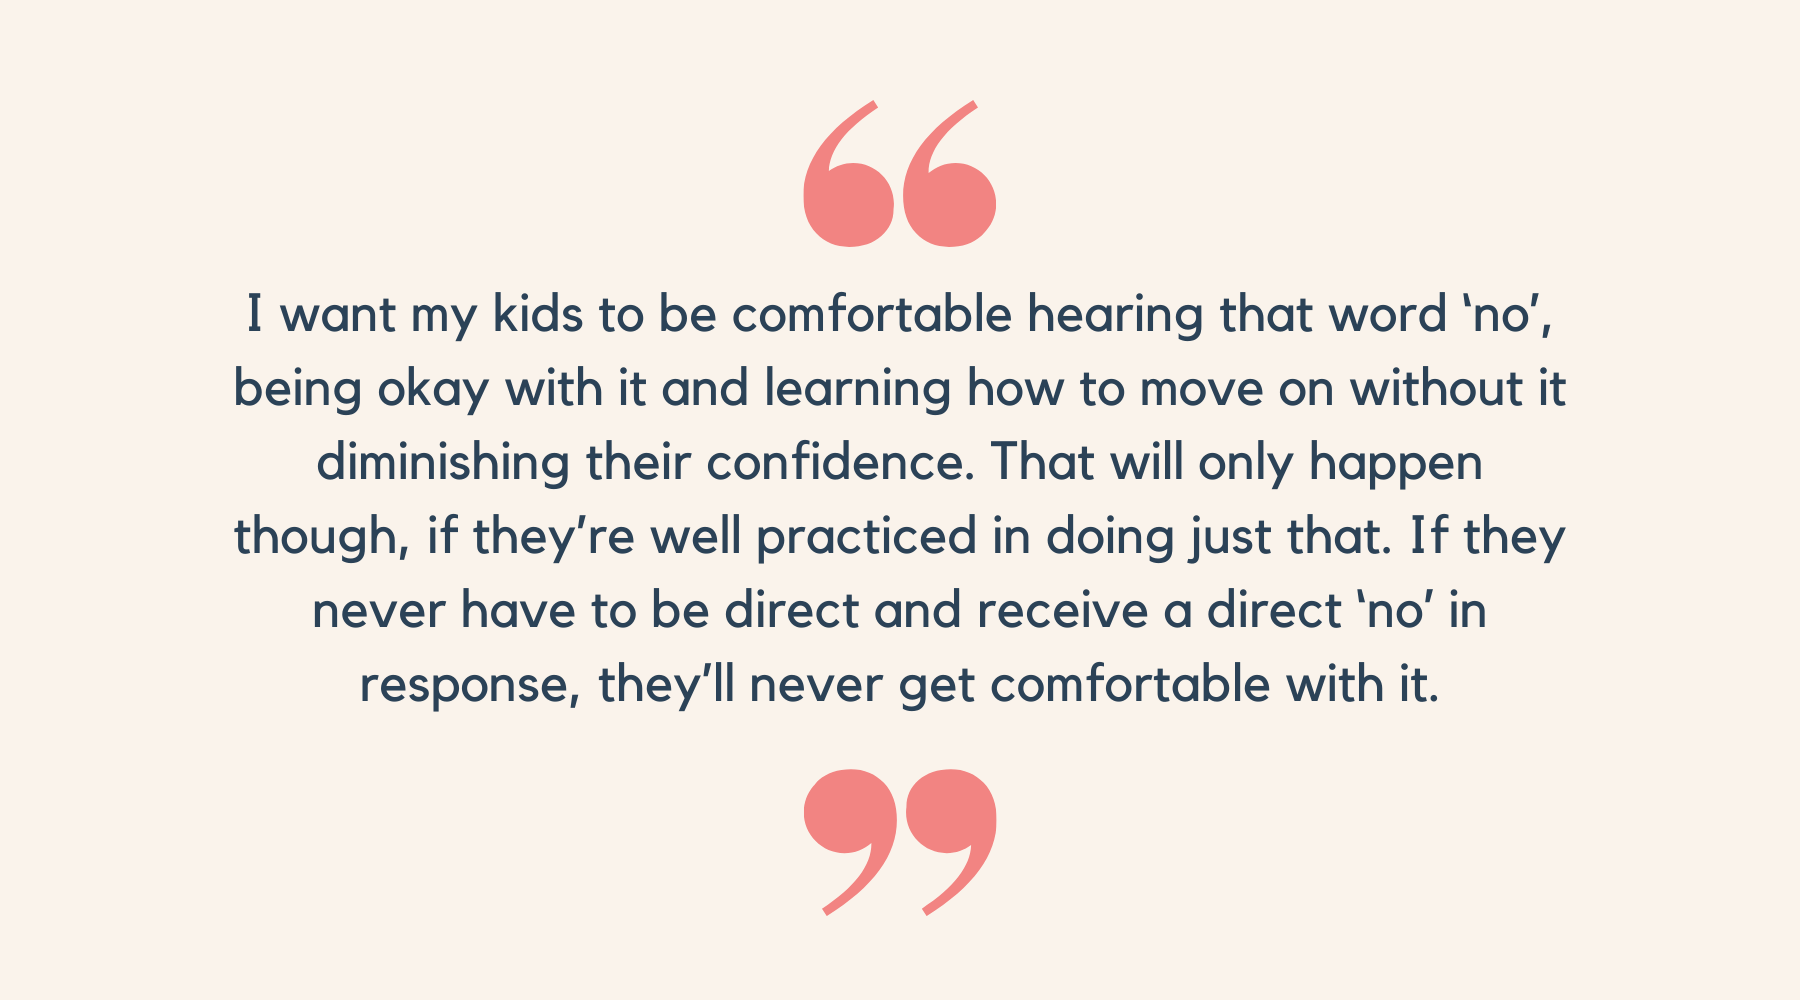 I want my kids to be comfortable hearing that word ‘no’, being okay with it and learning how to move on without it diminishing their confidence. That will only happen though, if they’re well practiced in doing just that. If they never have to be direct and receive a direct ‘no’ in response, they’ll never get comfortable with it.